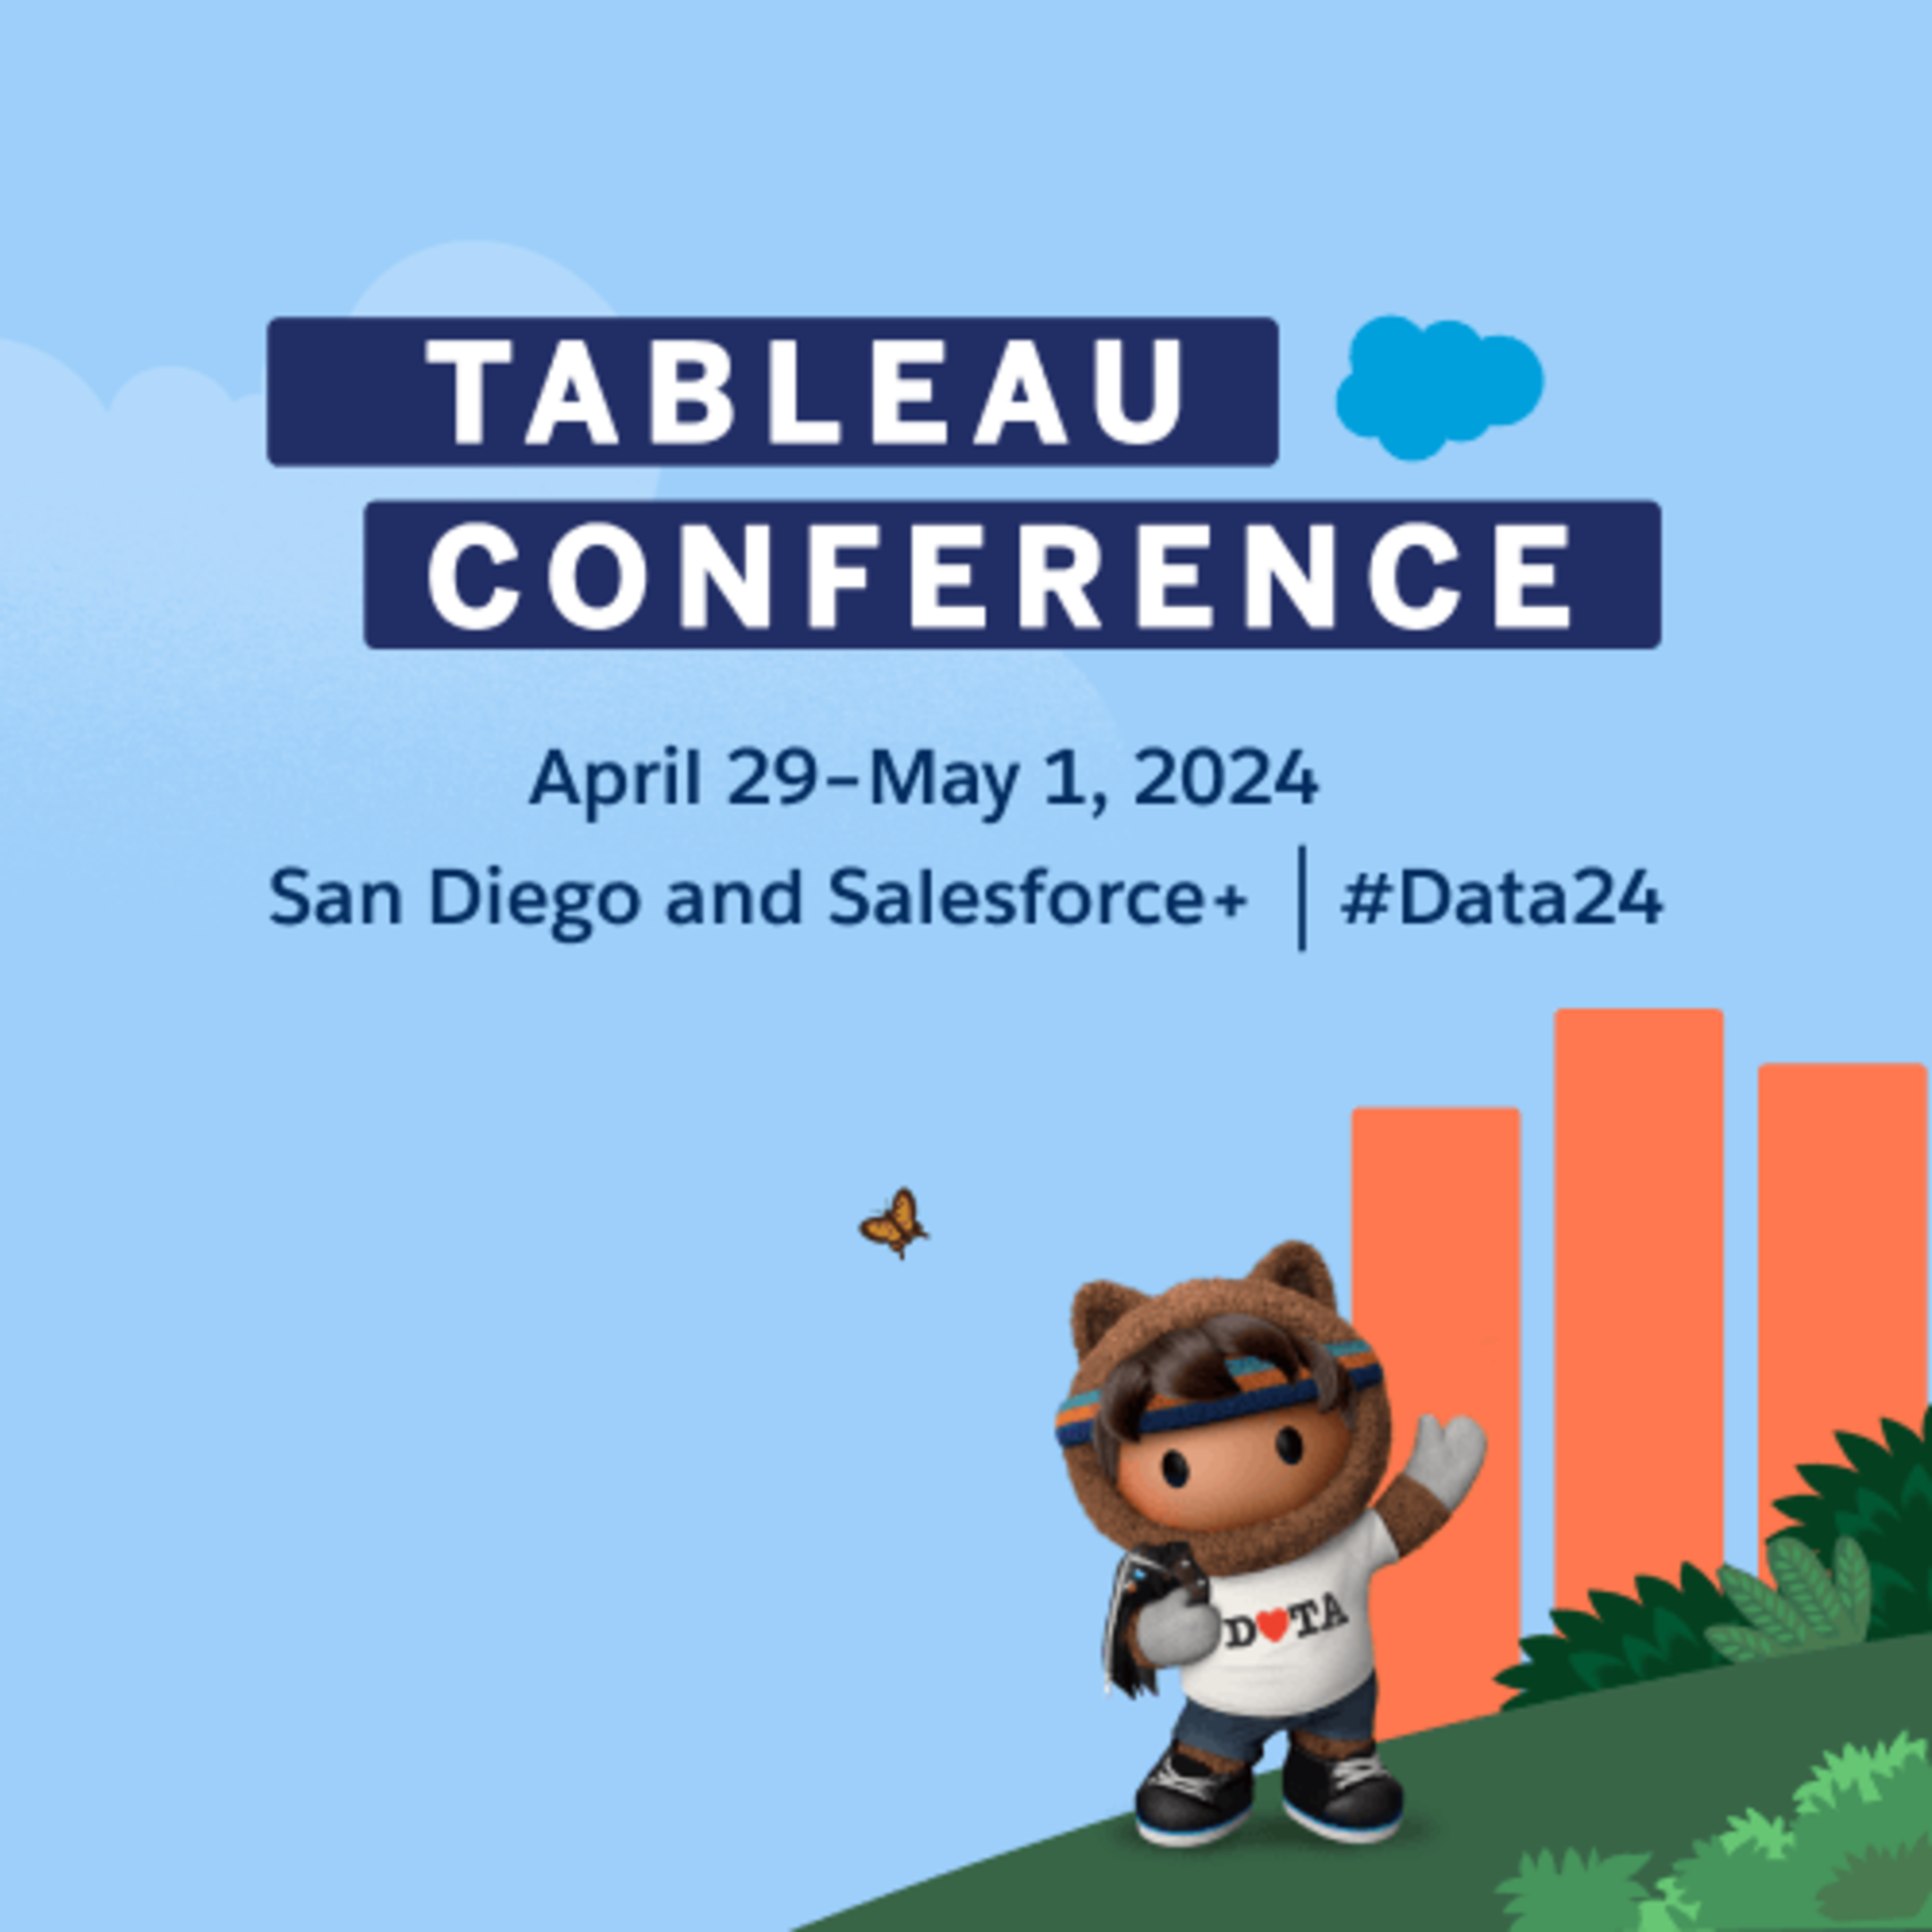 See Convite Tableau Conference 2024 at Tableau Brazil Tableau User Group